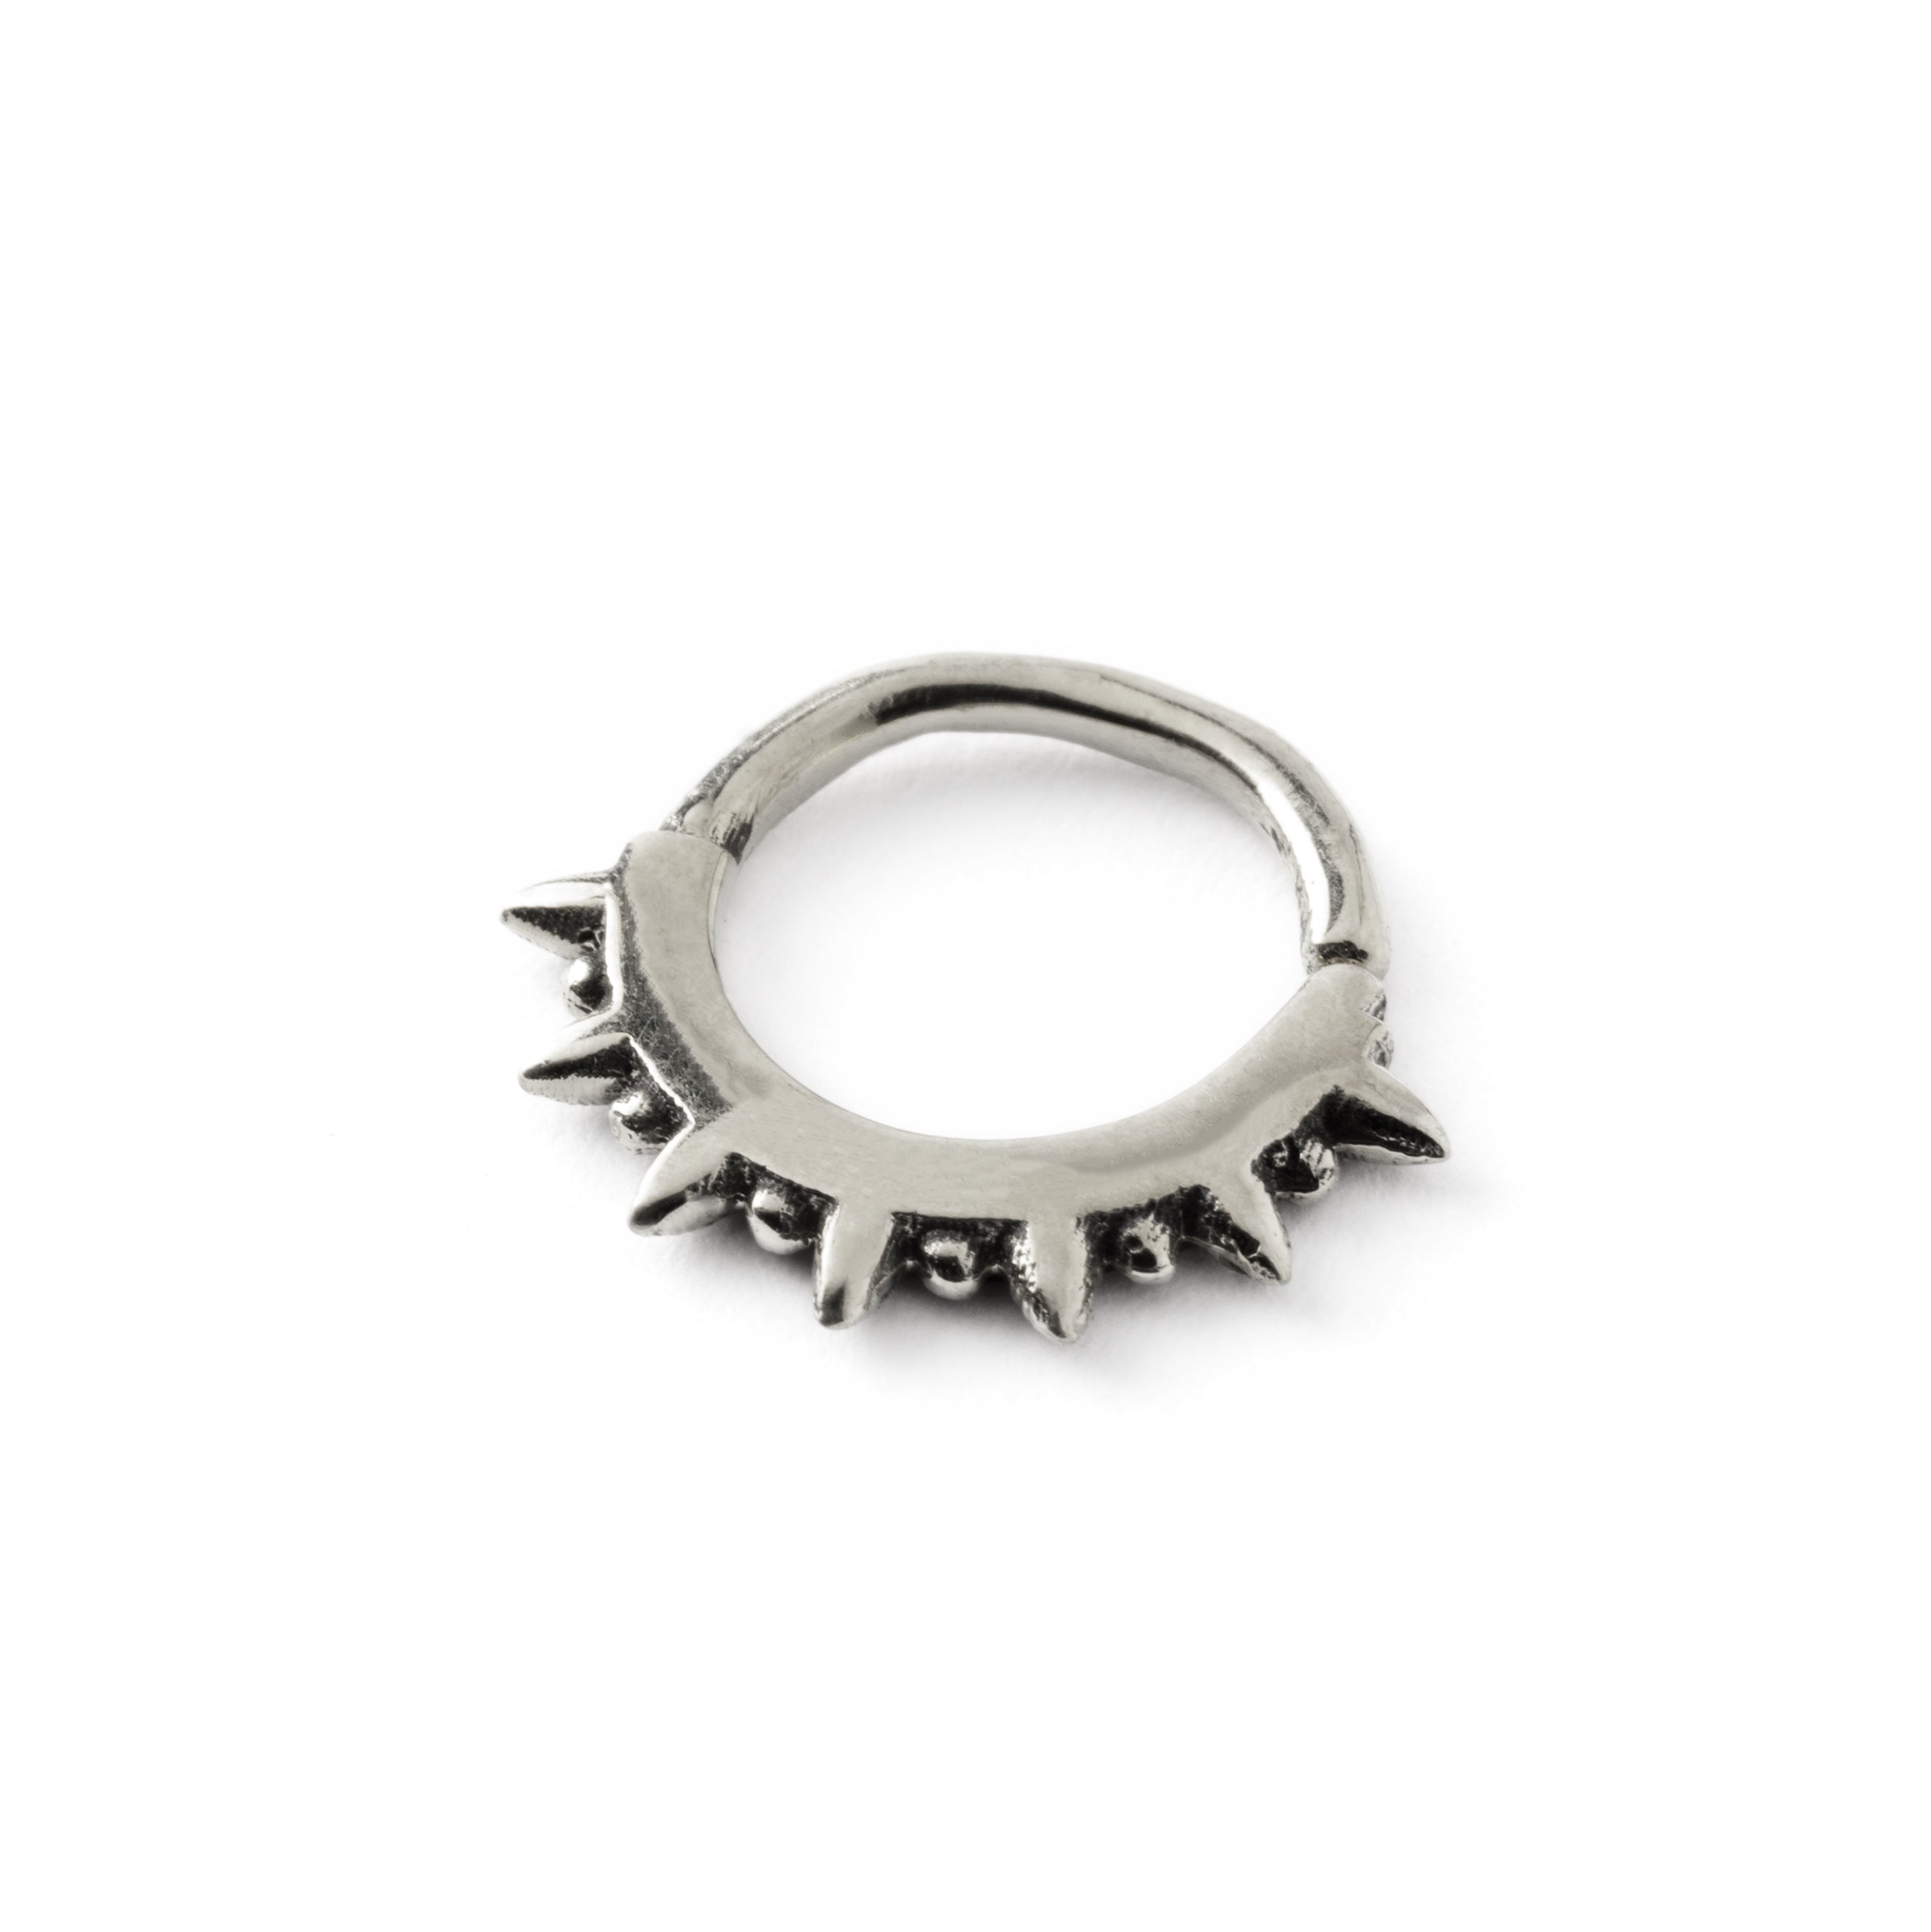 Shani silver septum ring with spiky ends left side view